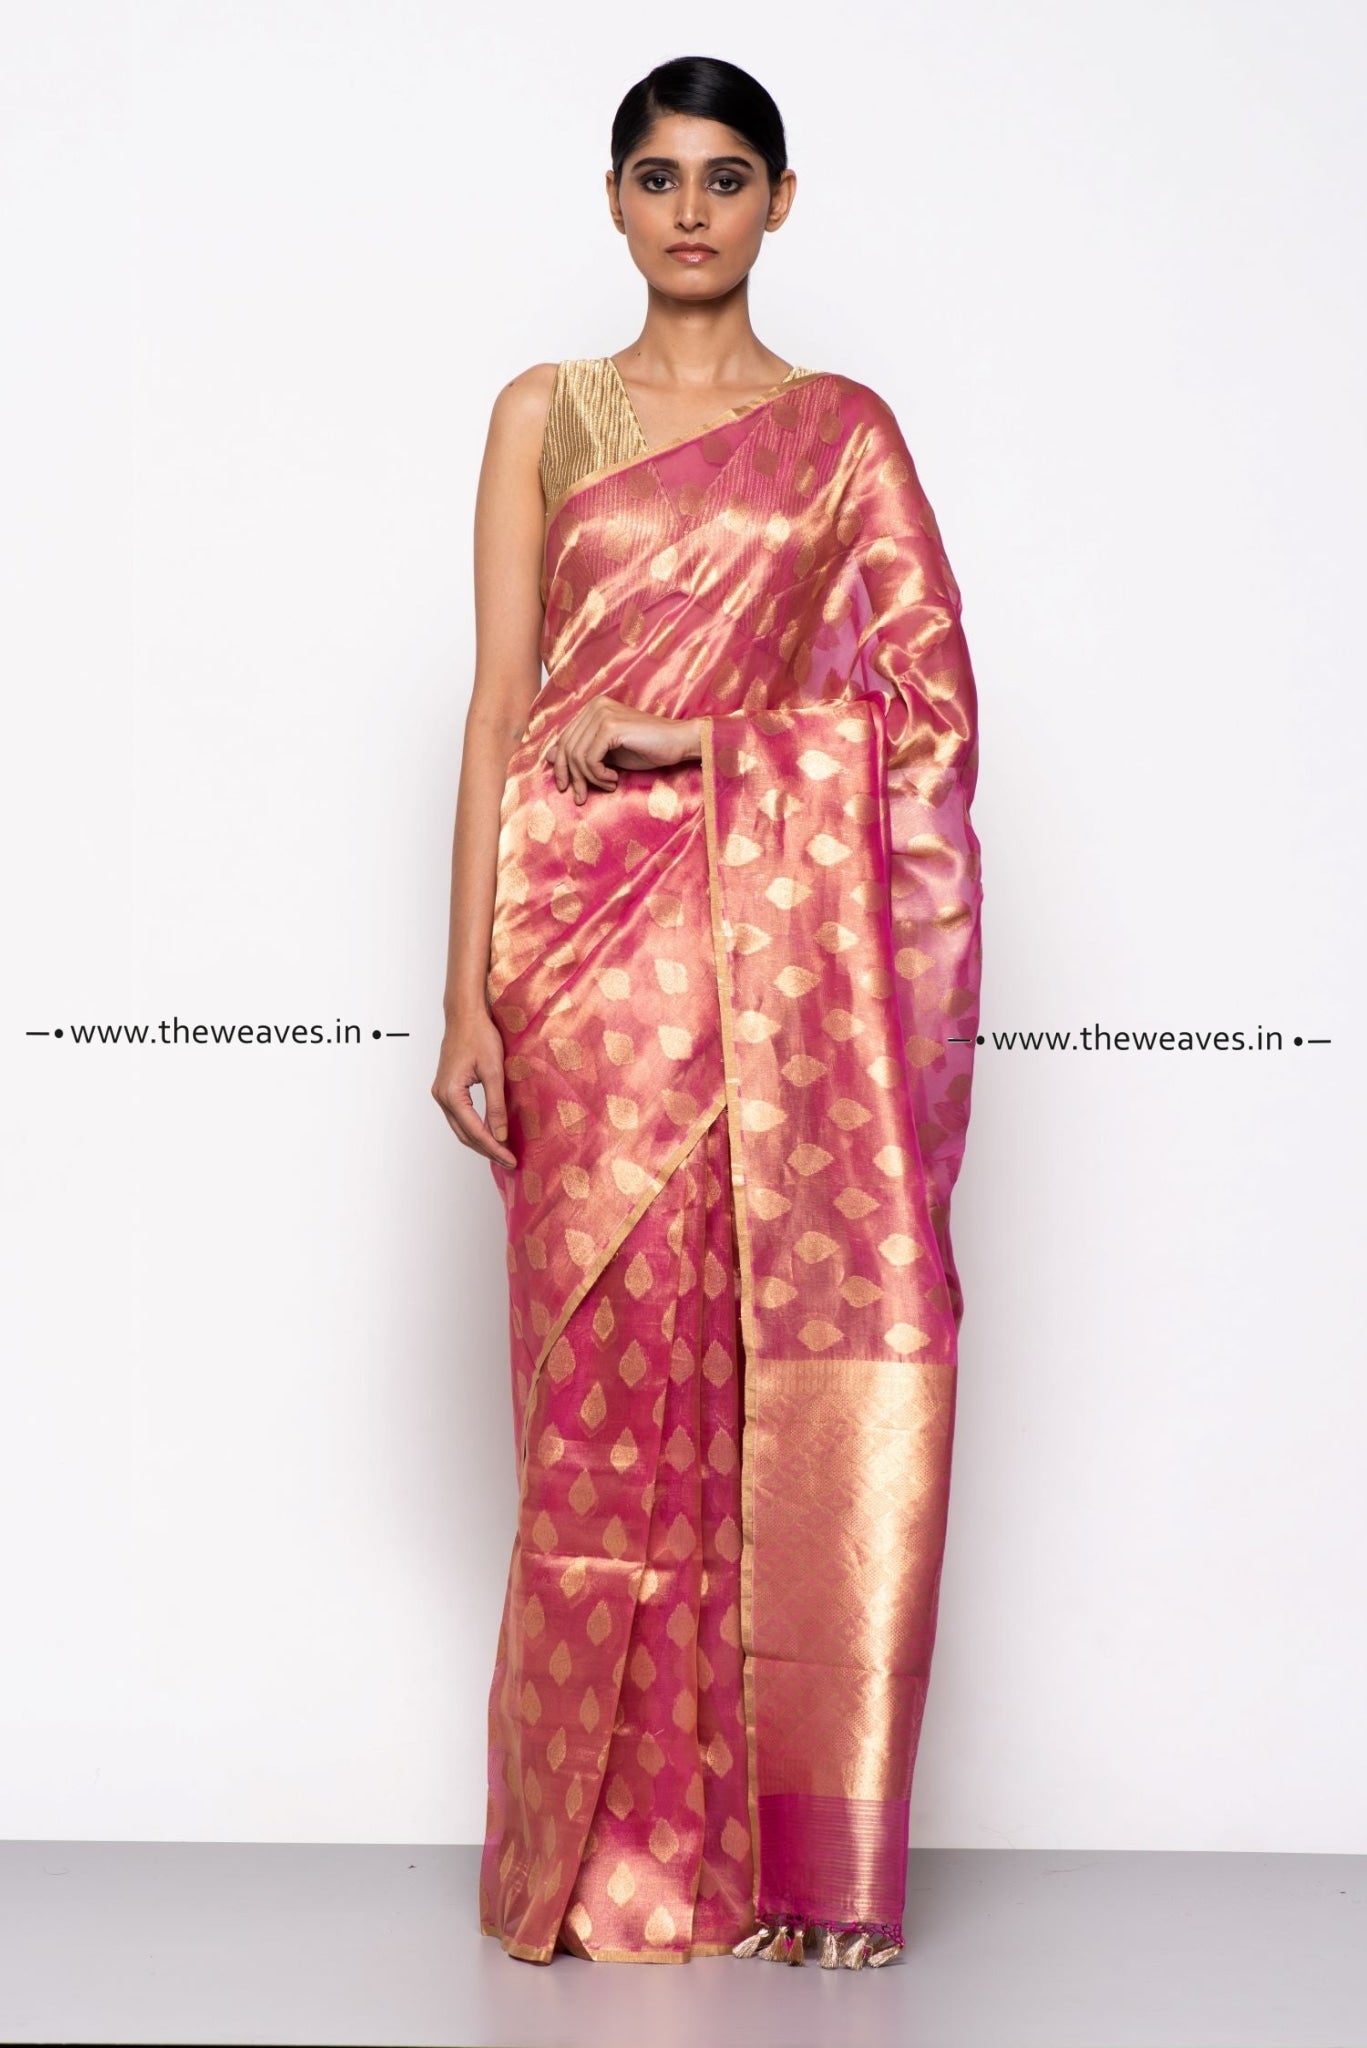 Handwoven Indian Pink Patterned Tissue Organza Saree